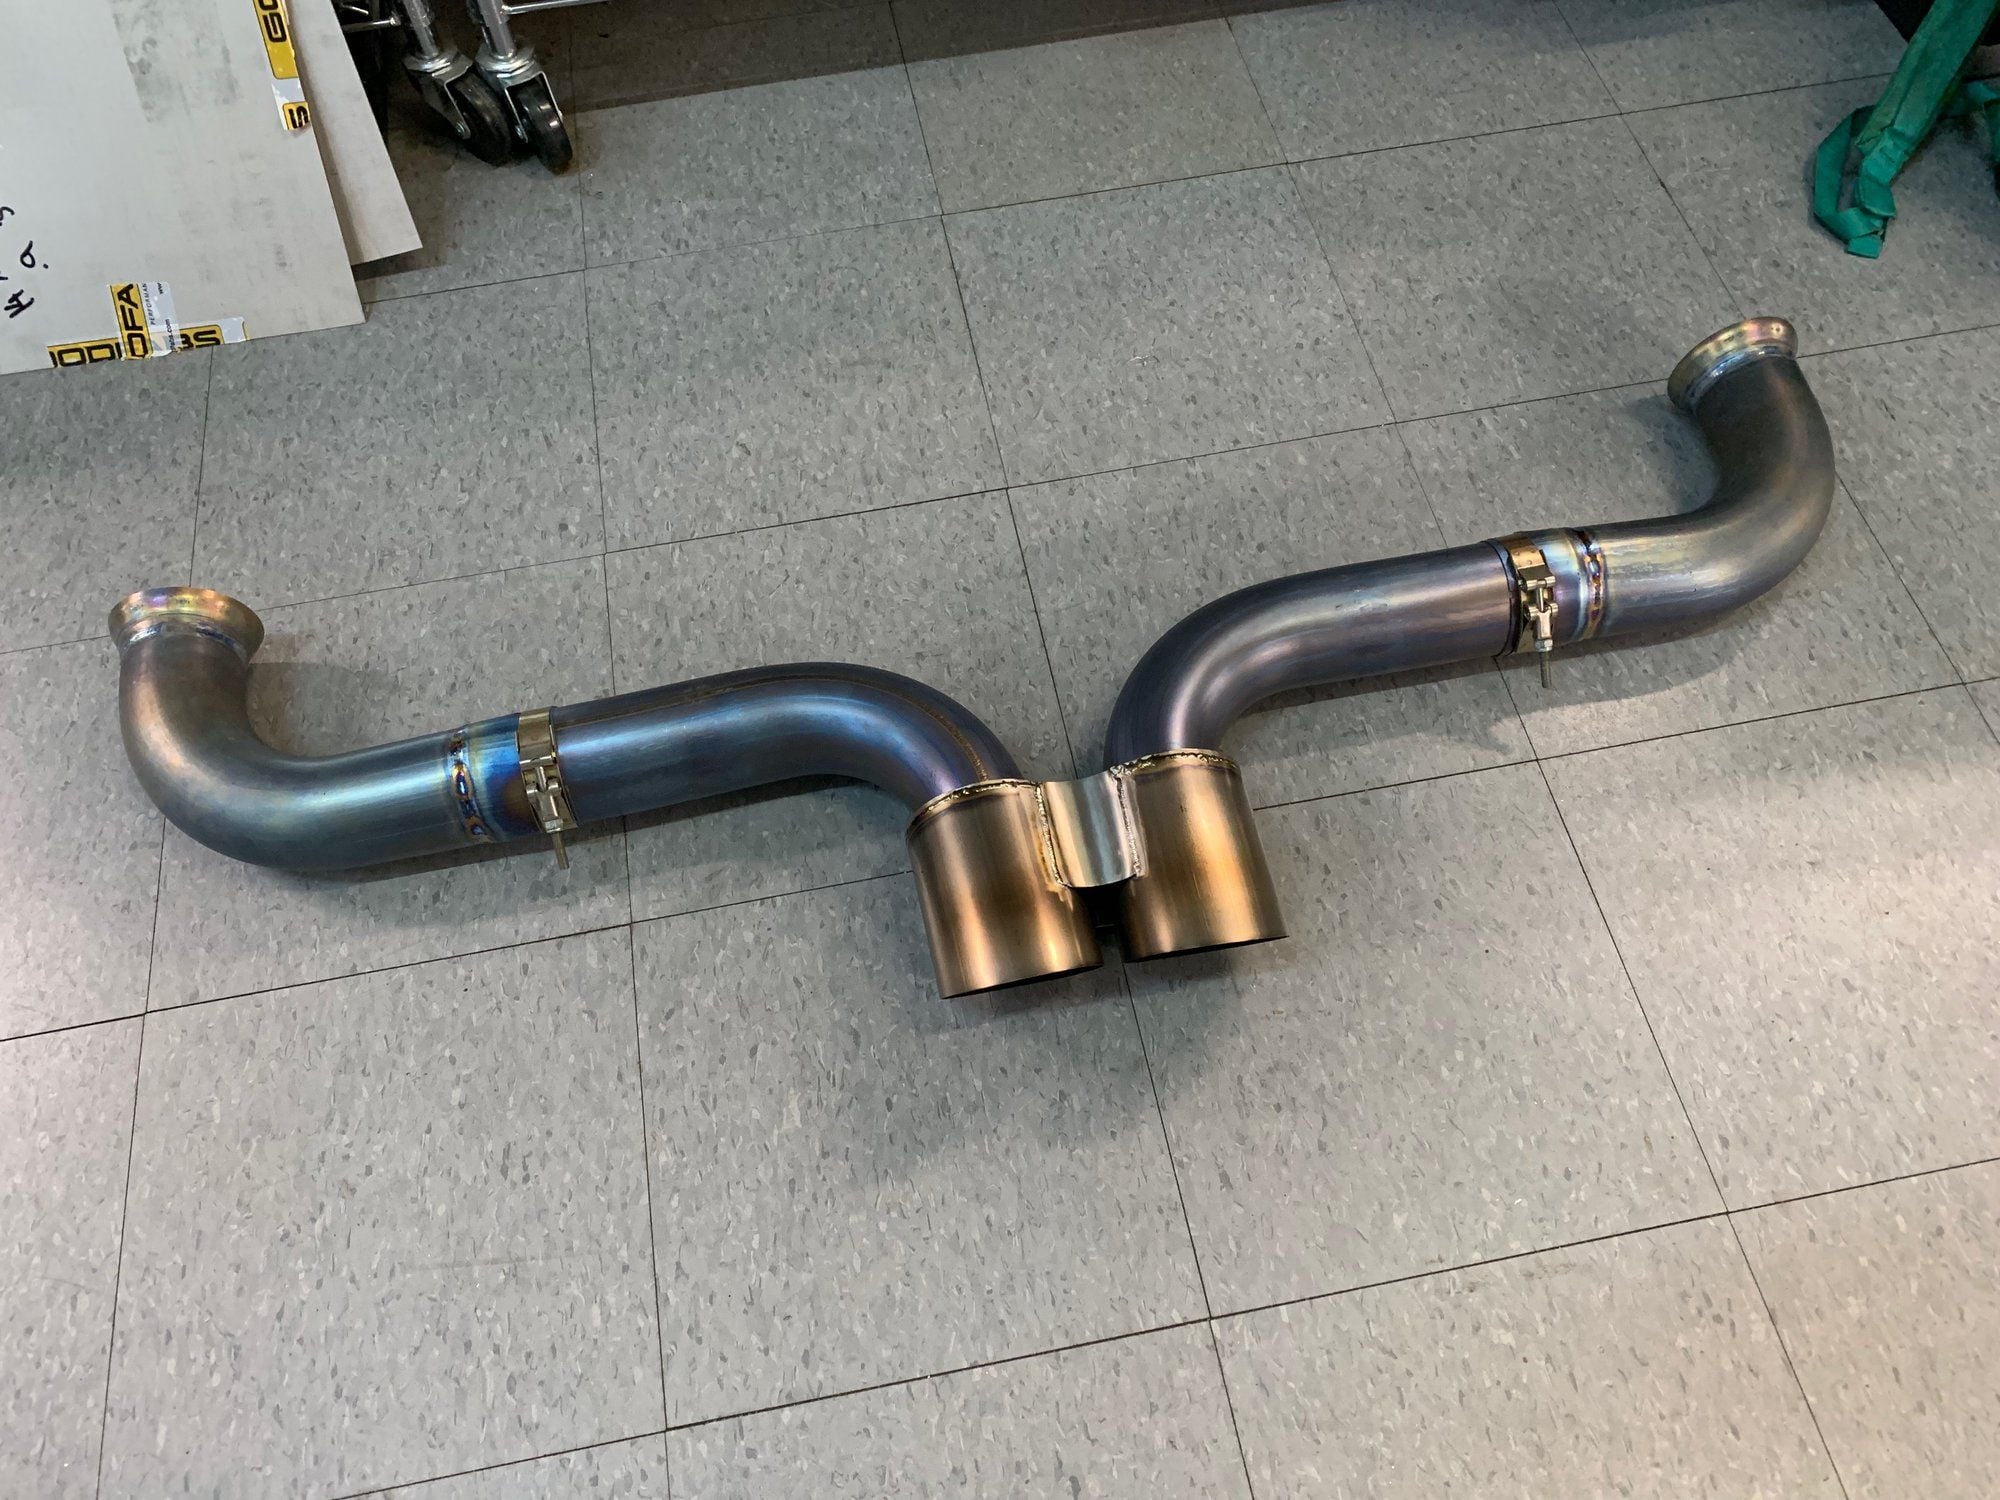 Engine - Exhaust - Sharkwerks Titanium Race Exhaust for 997 | 991 GT Models - Used - 2009 to 2019 Porsche 911 - Atlanta, GA 30040, United States